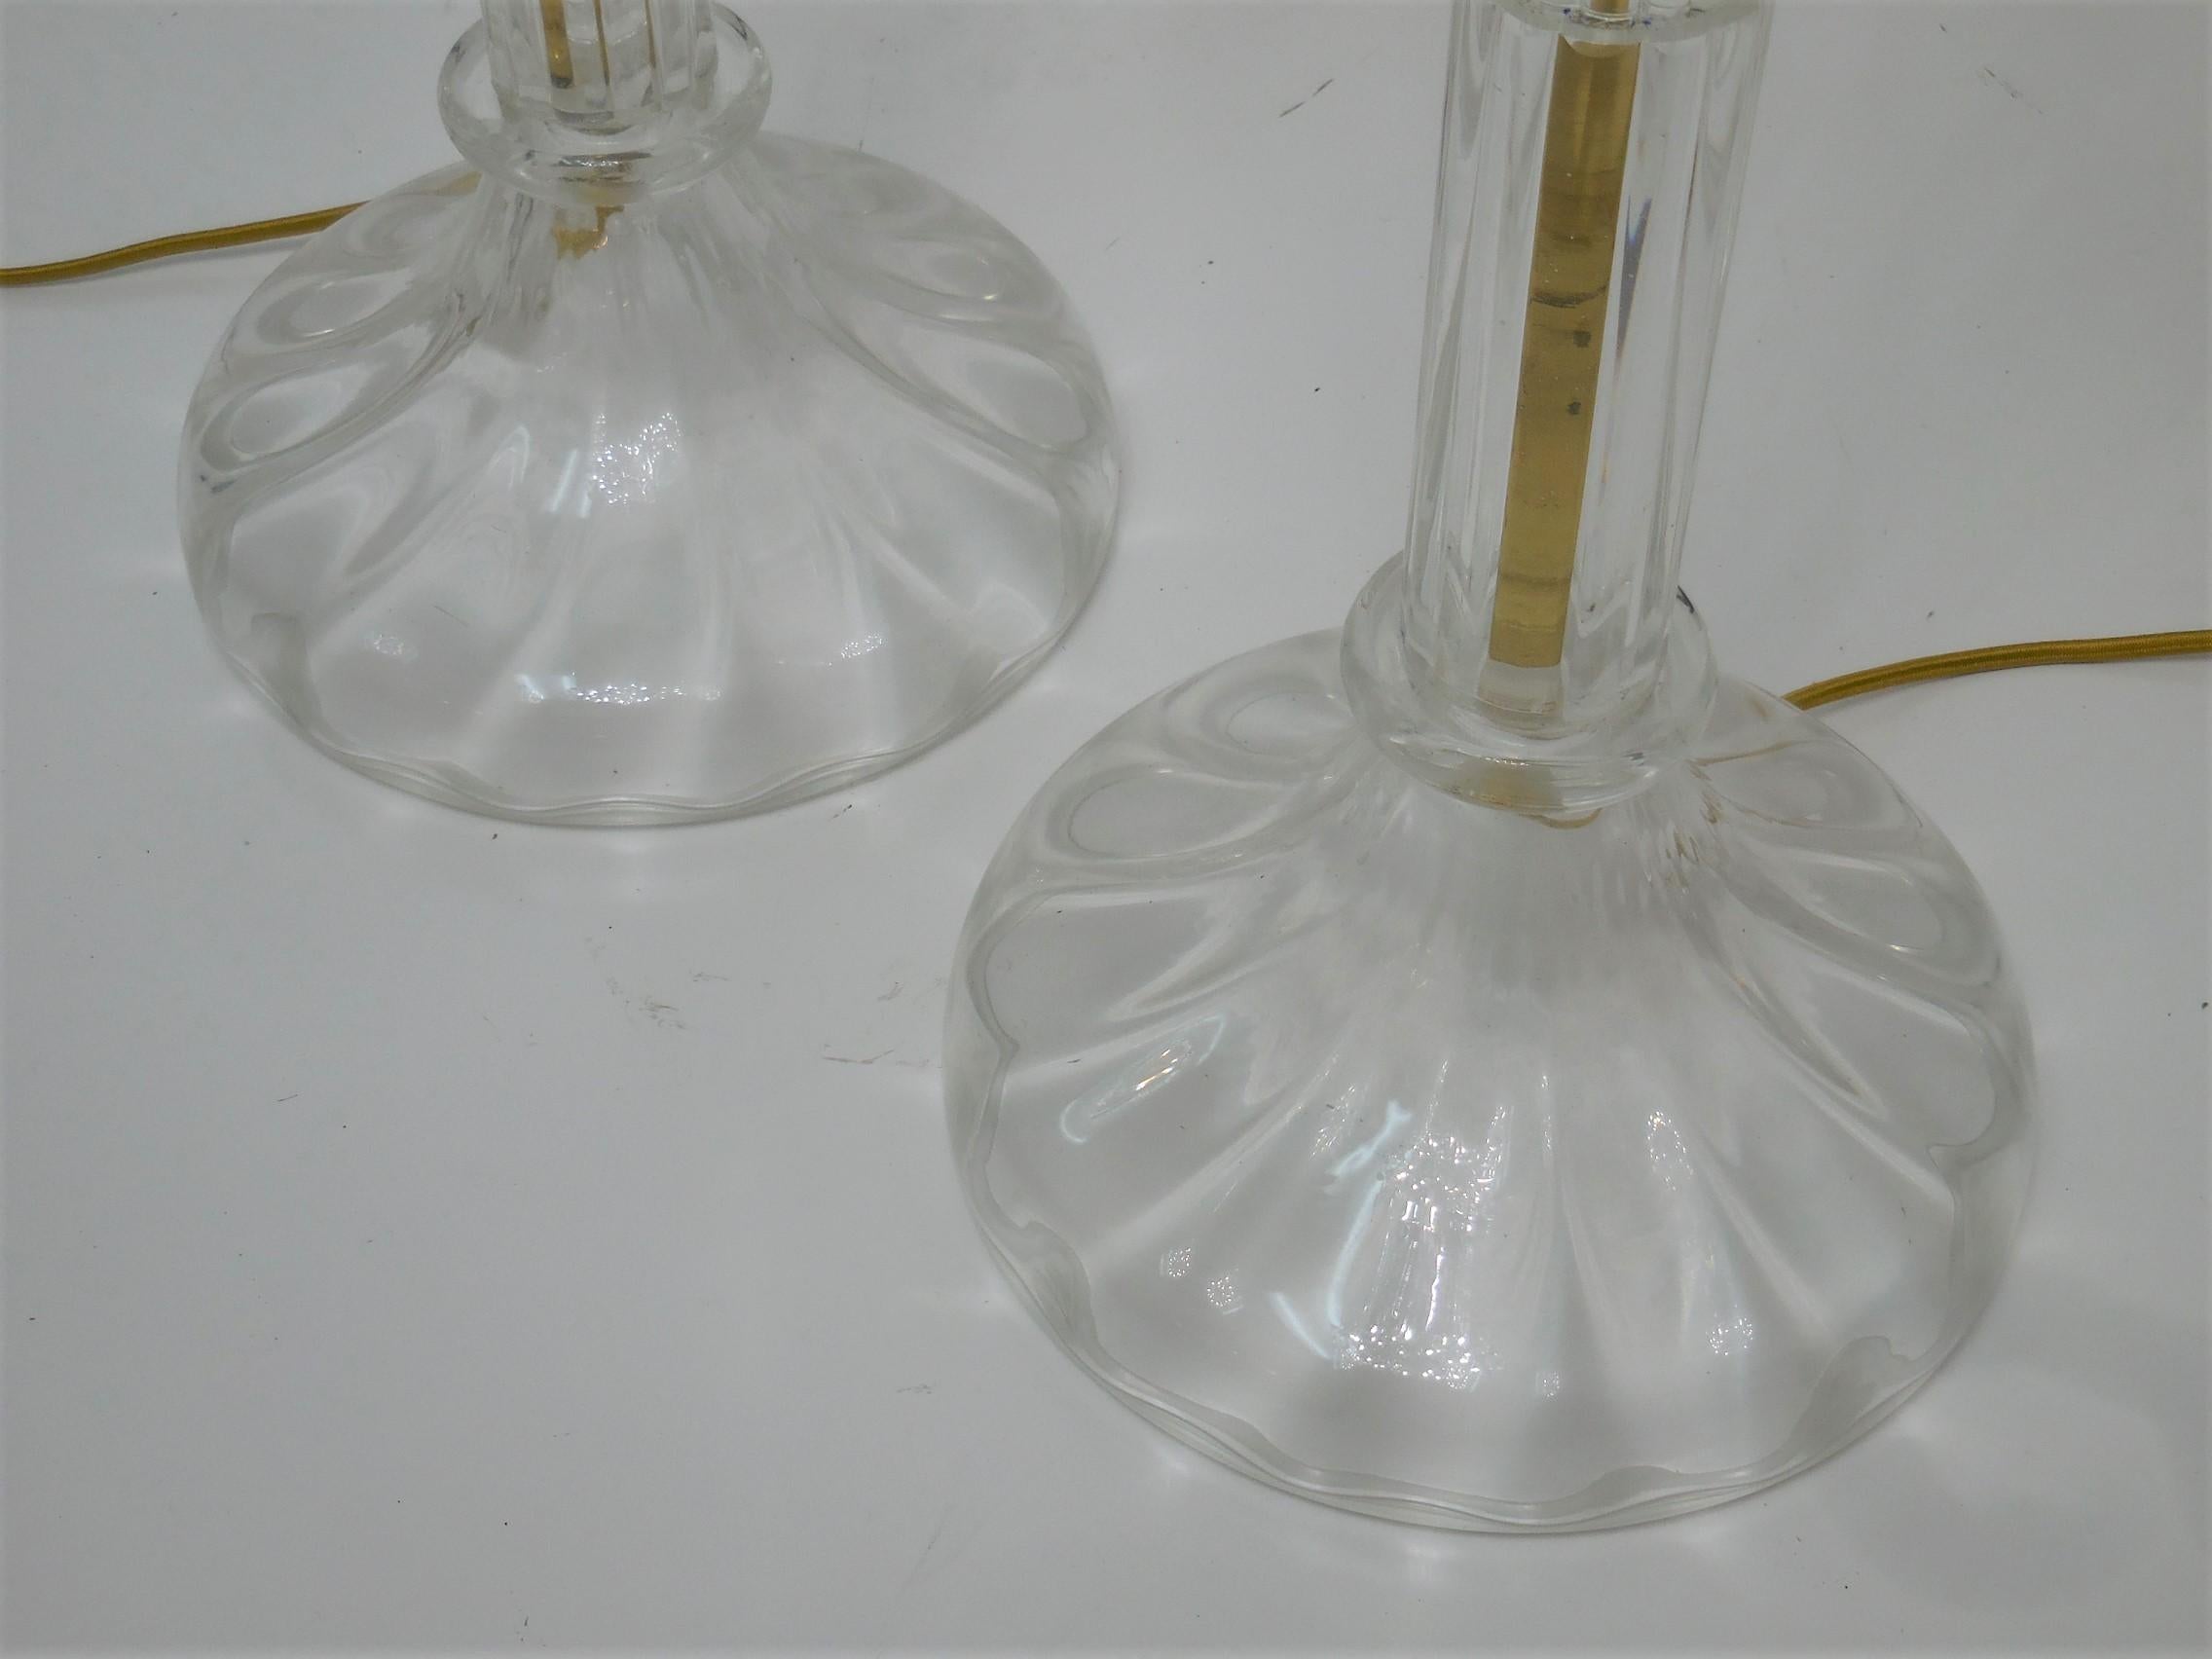 Ruhlmann Style Pair of Murano Glass Lamps by Cenedese 1